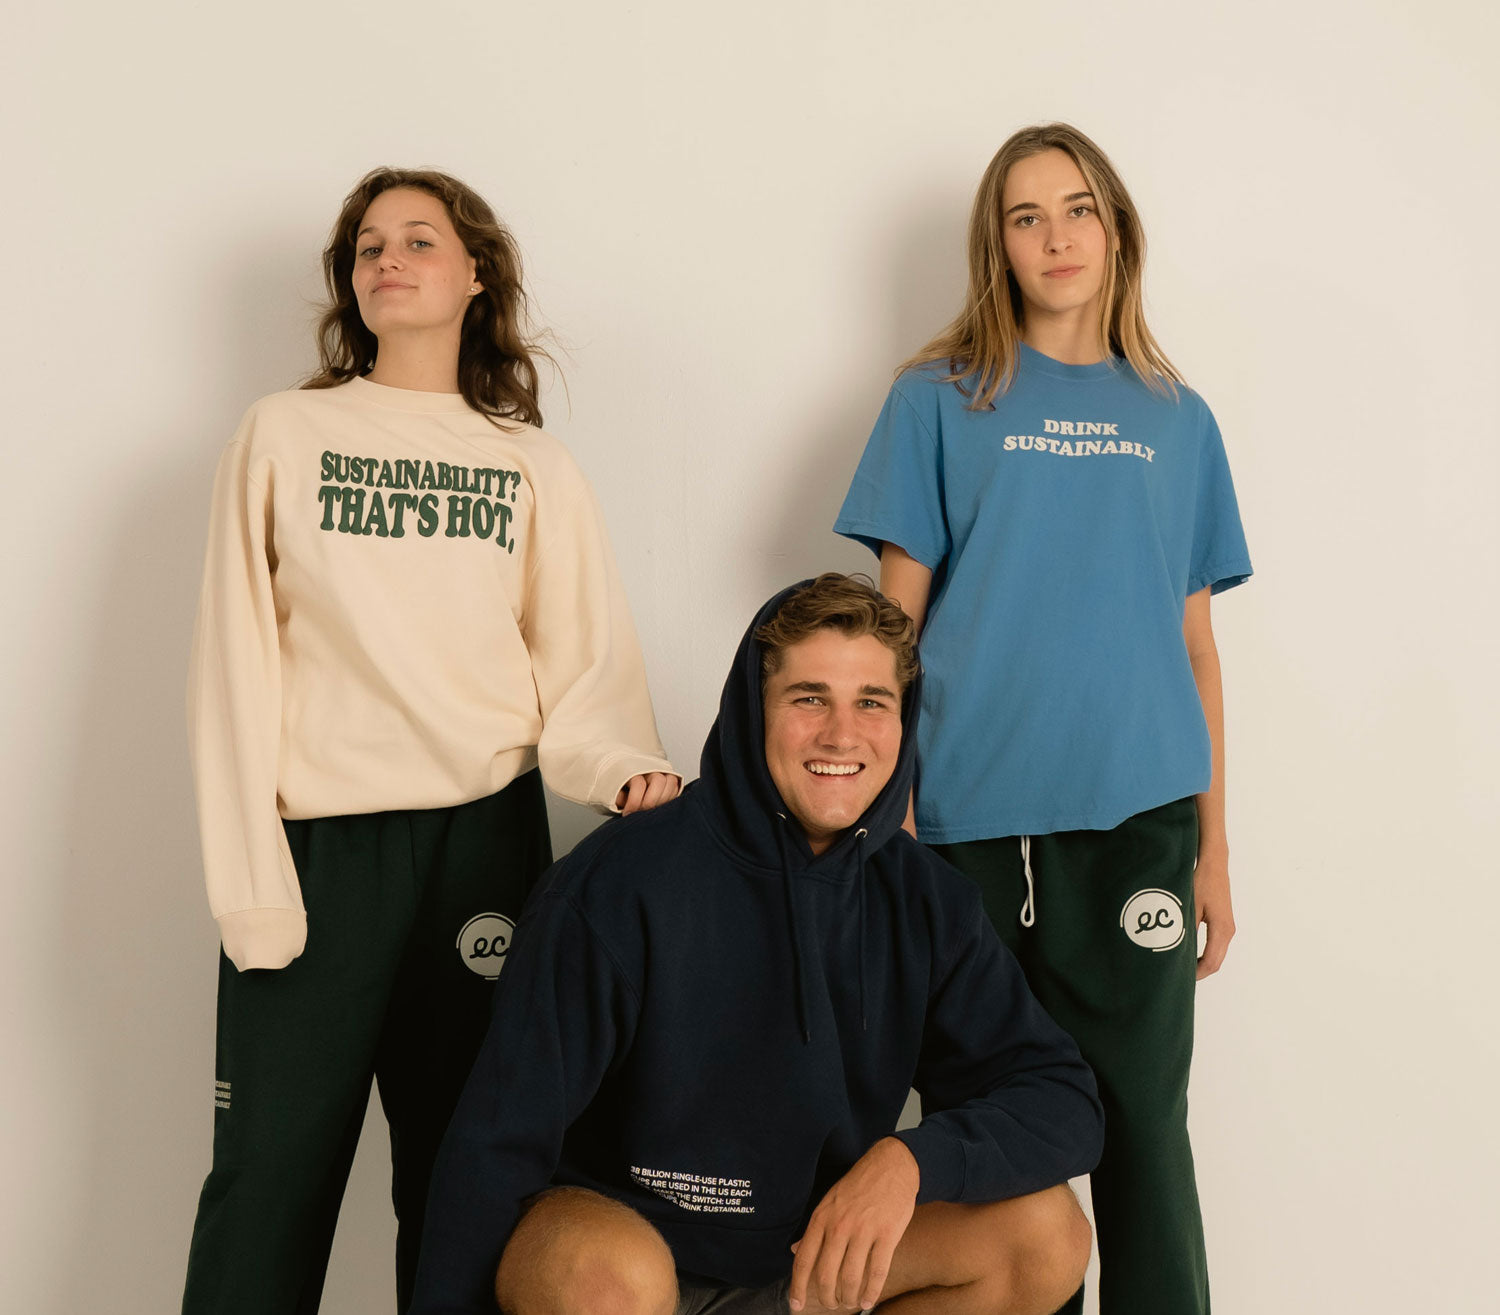 3 Models wearing Earth Cups Apparel and Merchandise